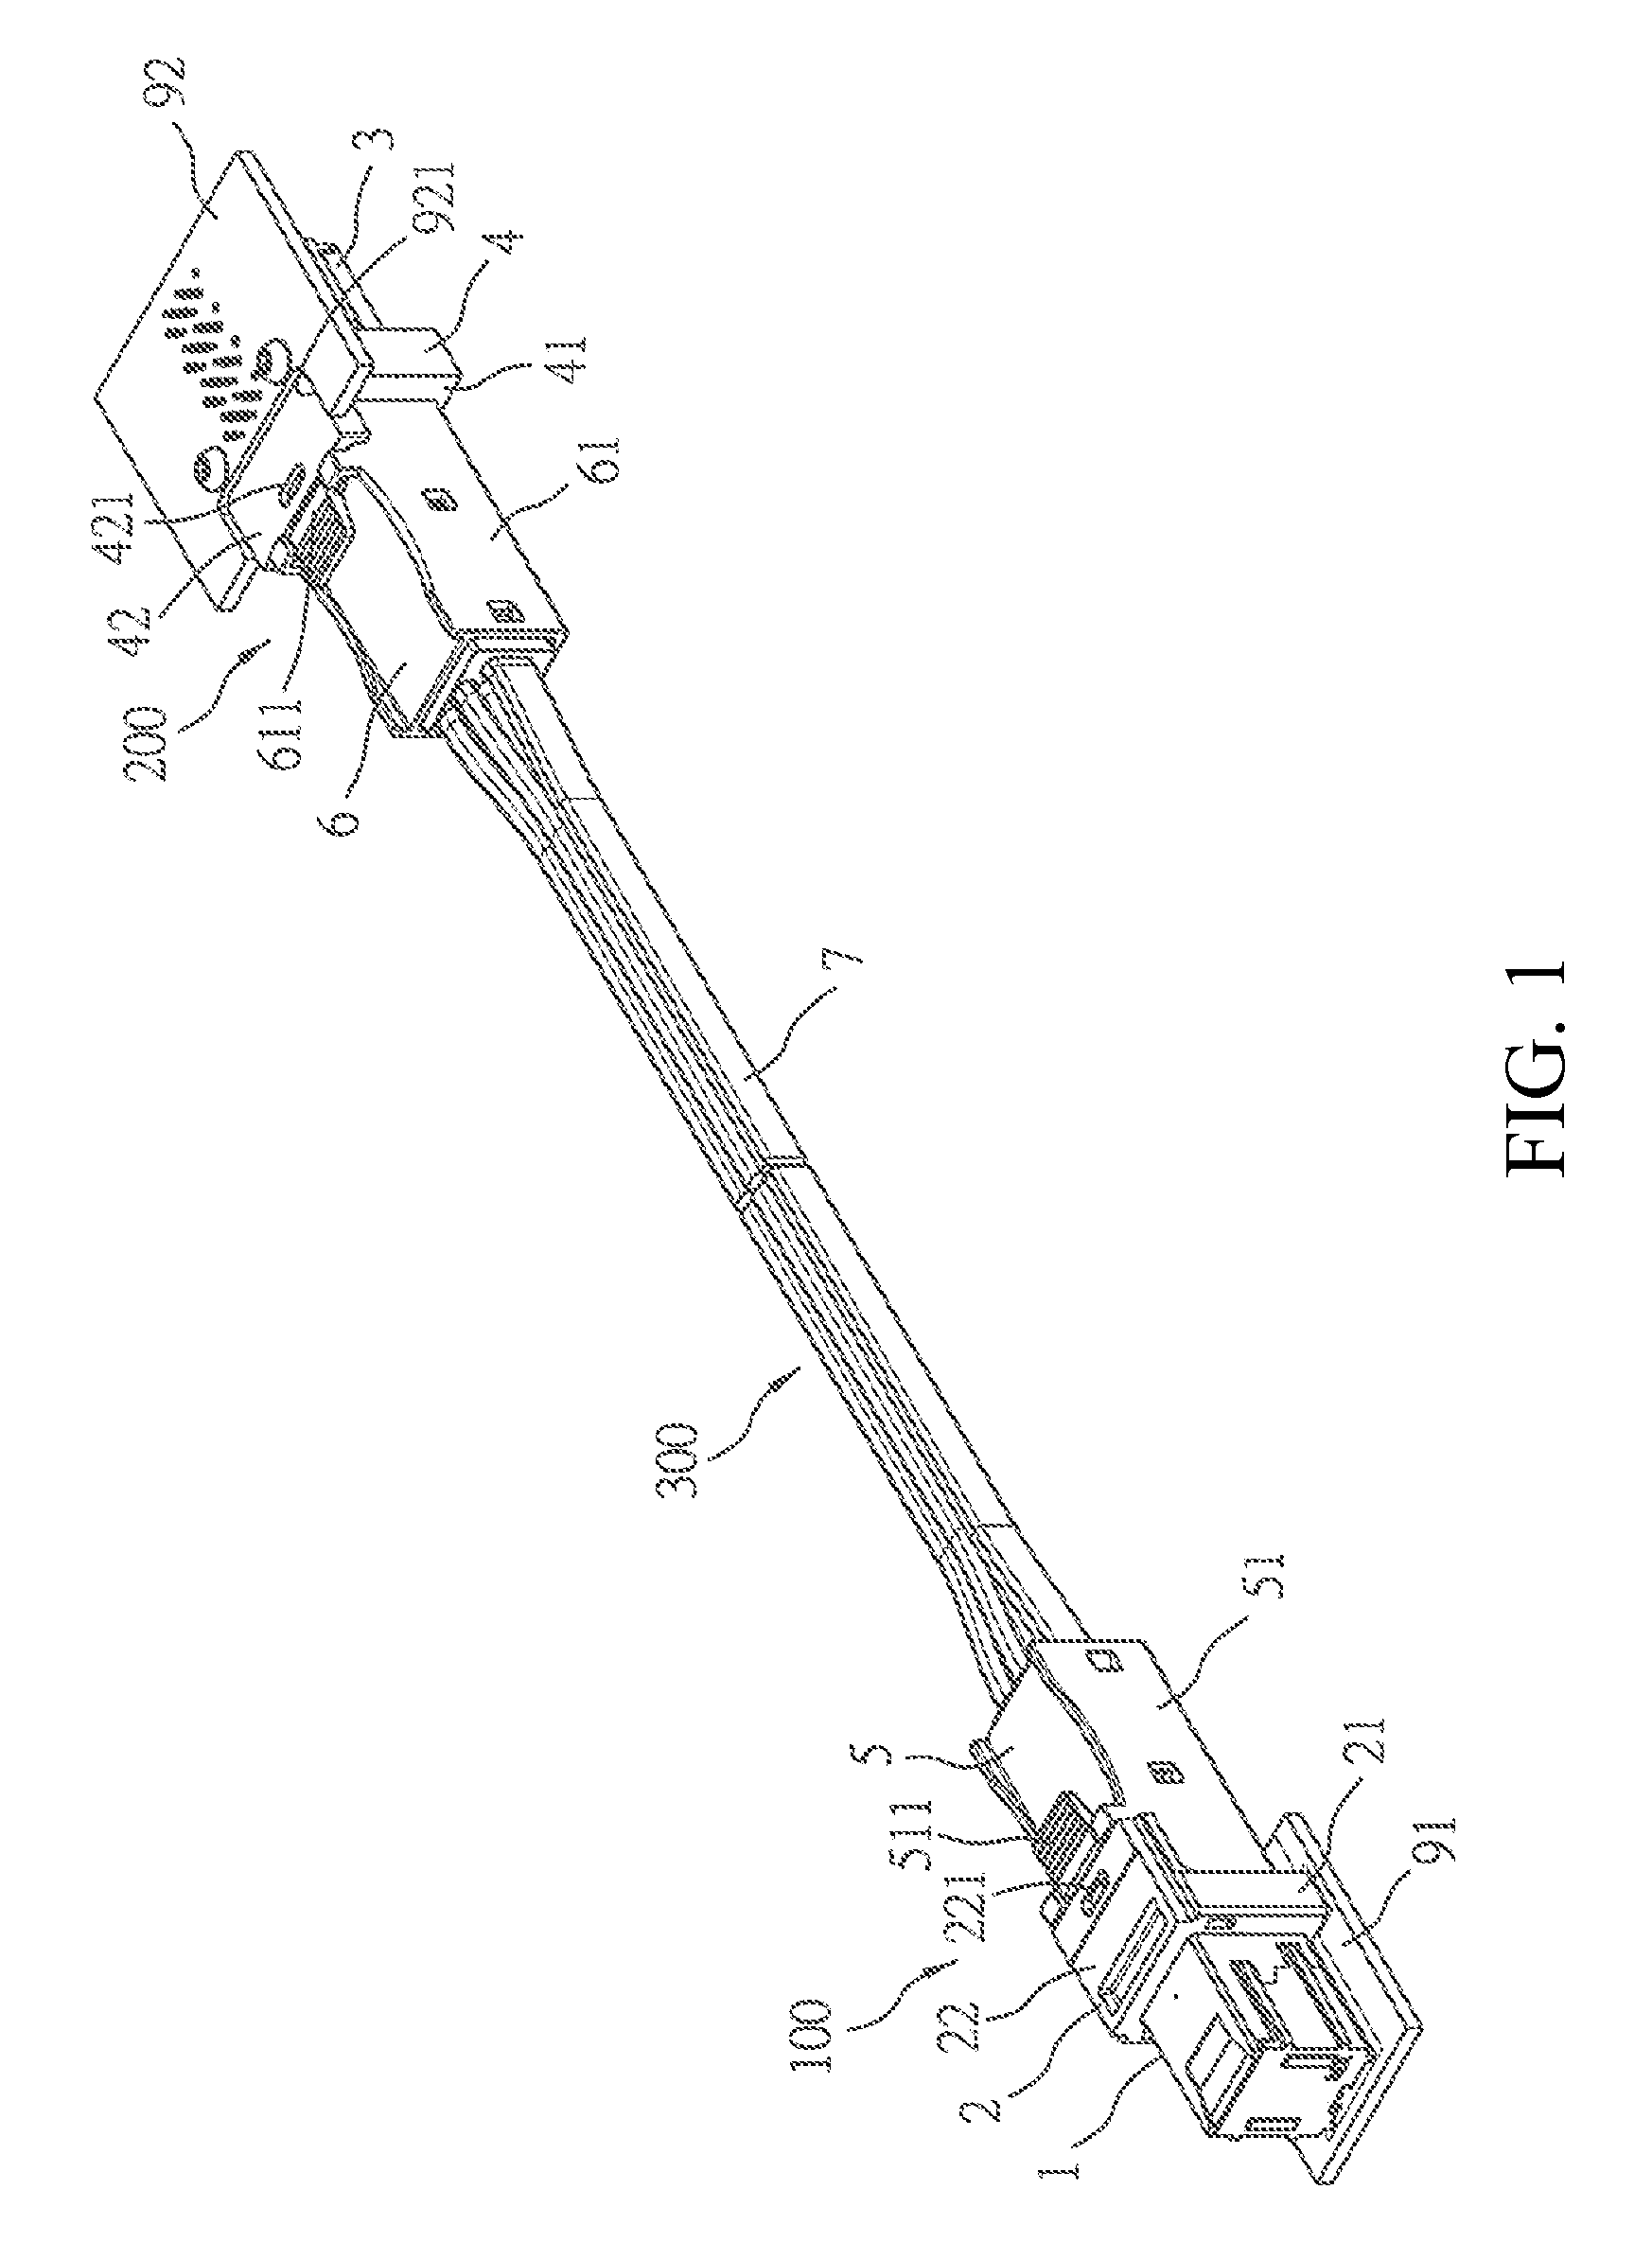 Electrical connection device having a standard plug and a reverse plug at two ends of a cable